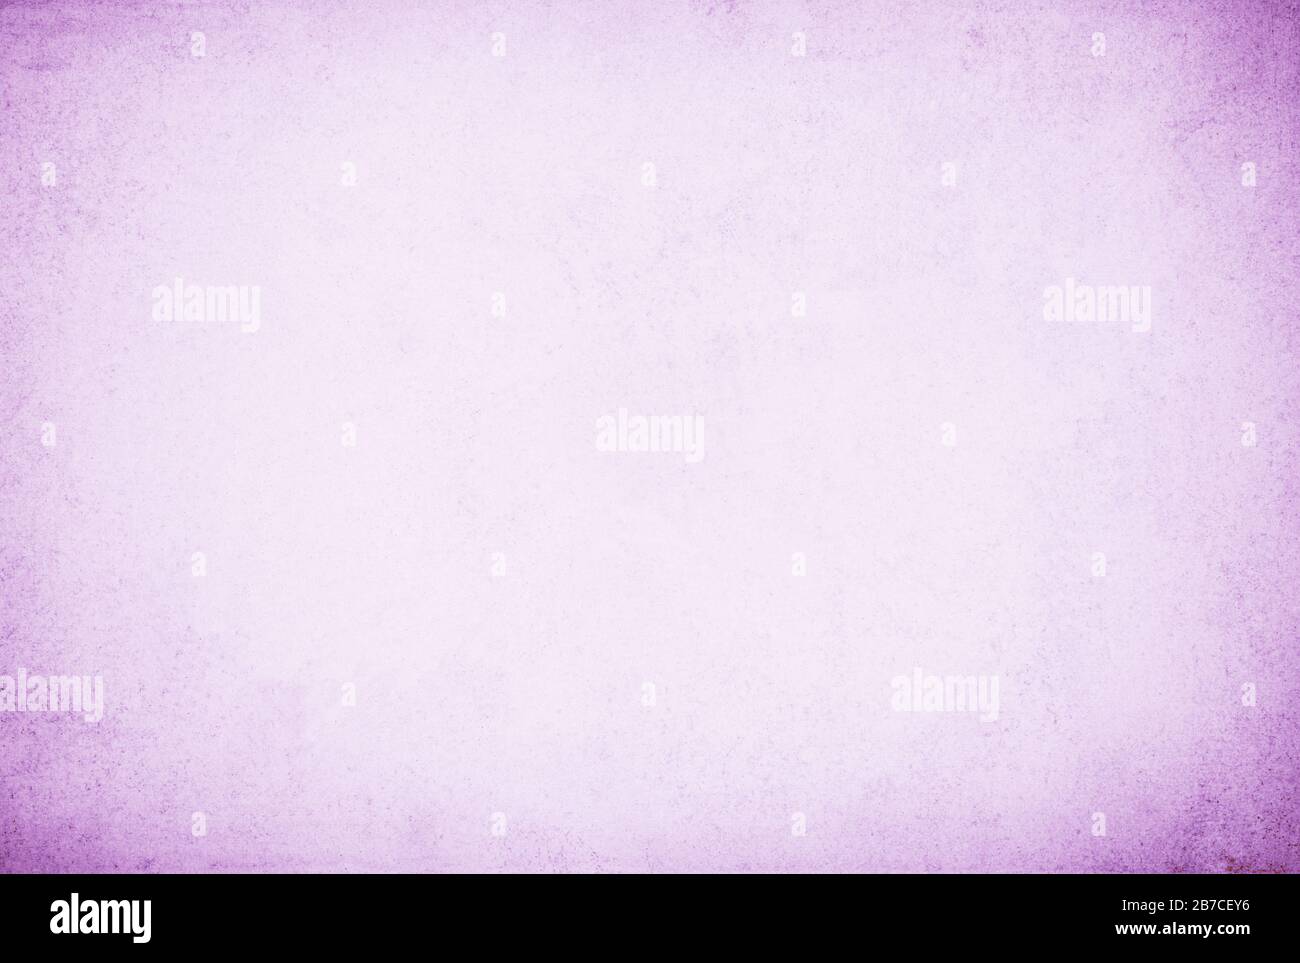 Light Purple Paper Texture Background Stock Photo, Picture and Royalty Free  Image. Image 104920327.